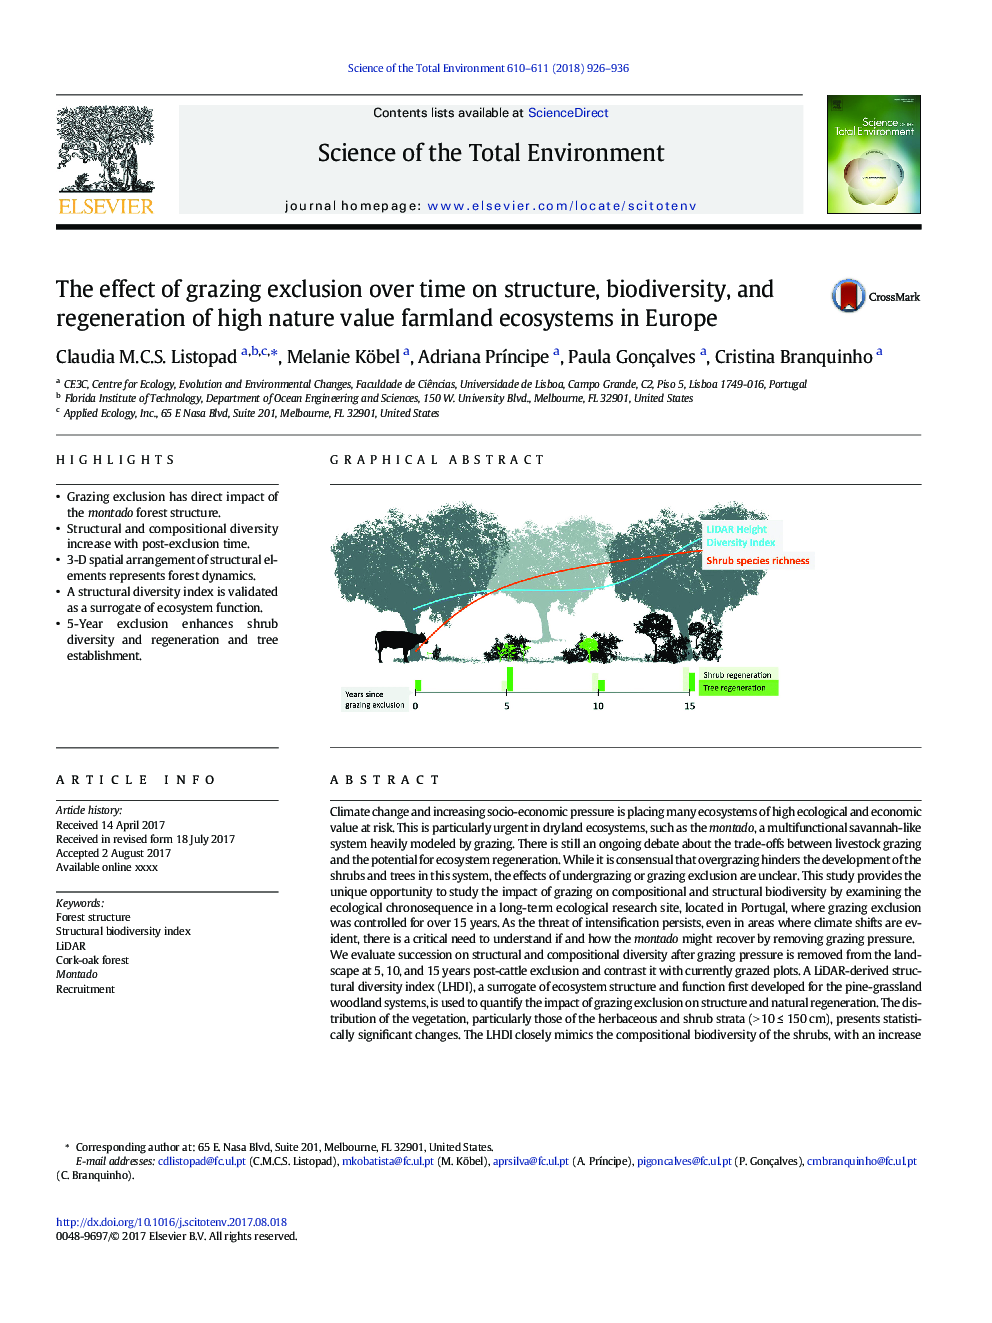 The effect of grazing exclusion over time on structure, biodiversity, and regeneration of high nature value farmland ecosystems in Europe